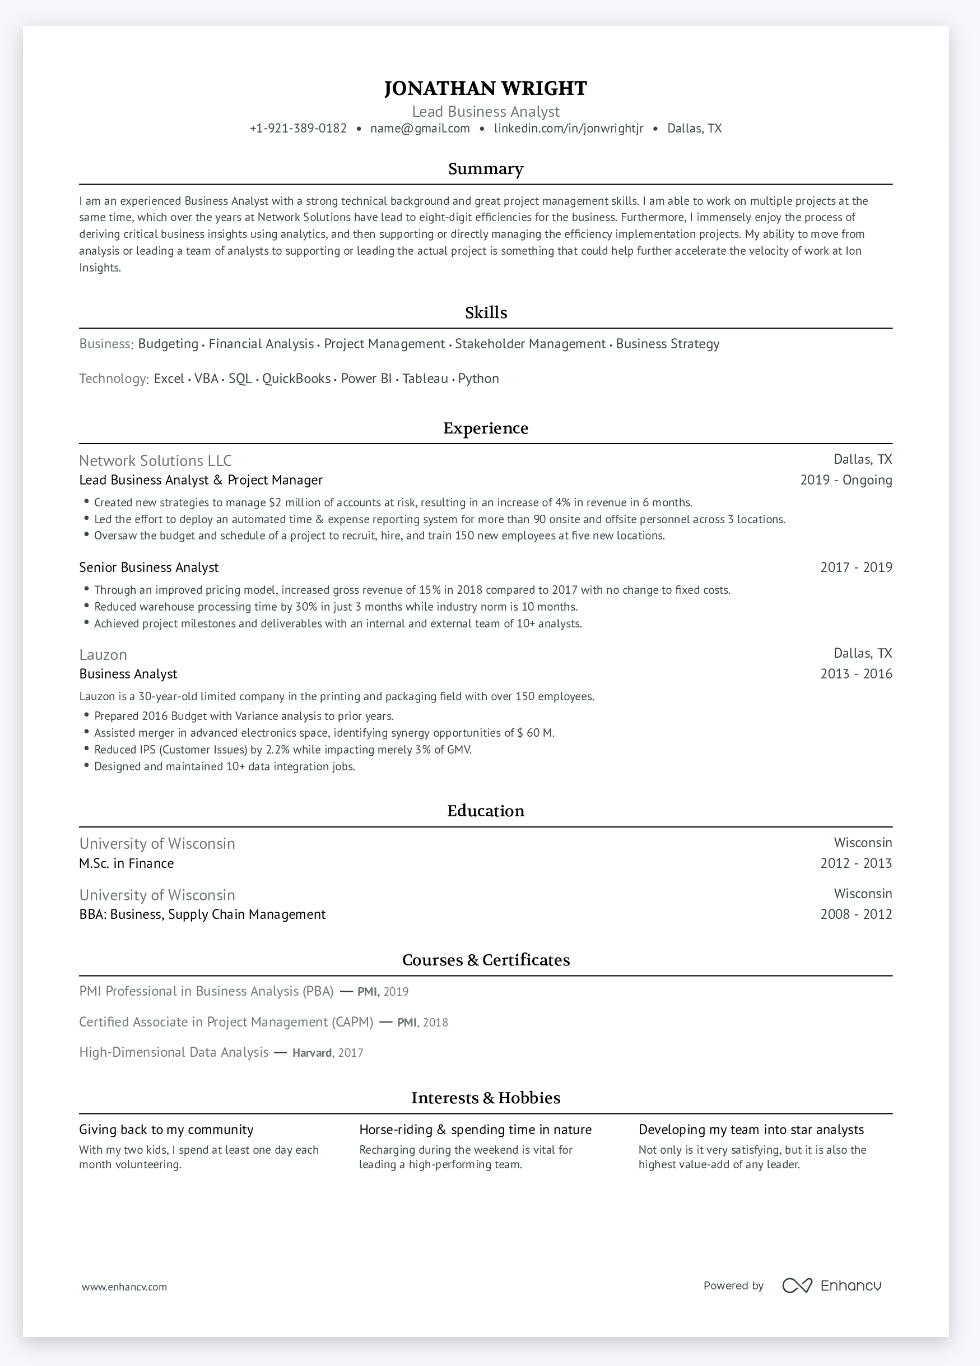 Lead Business Analyst resume example